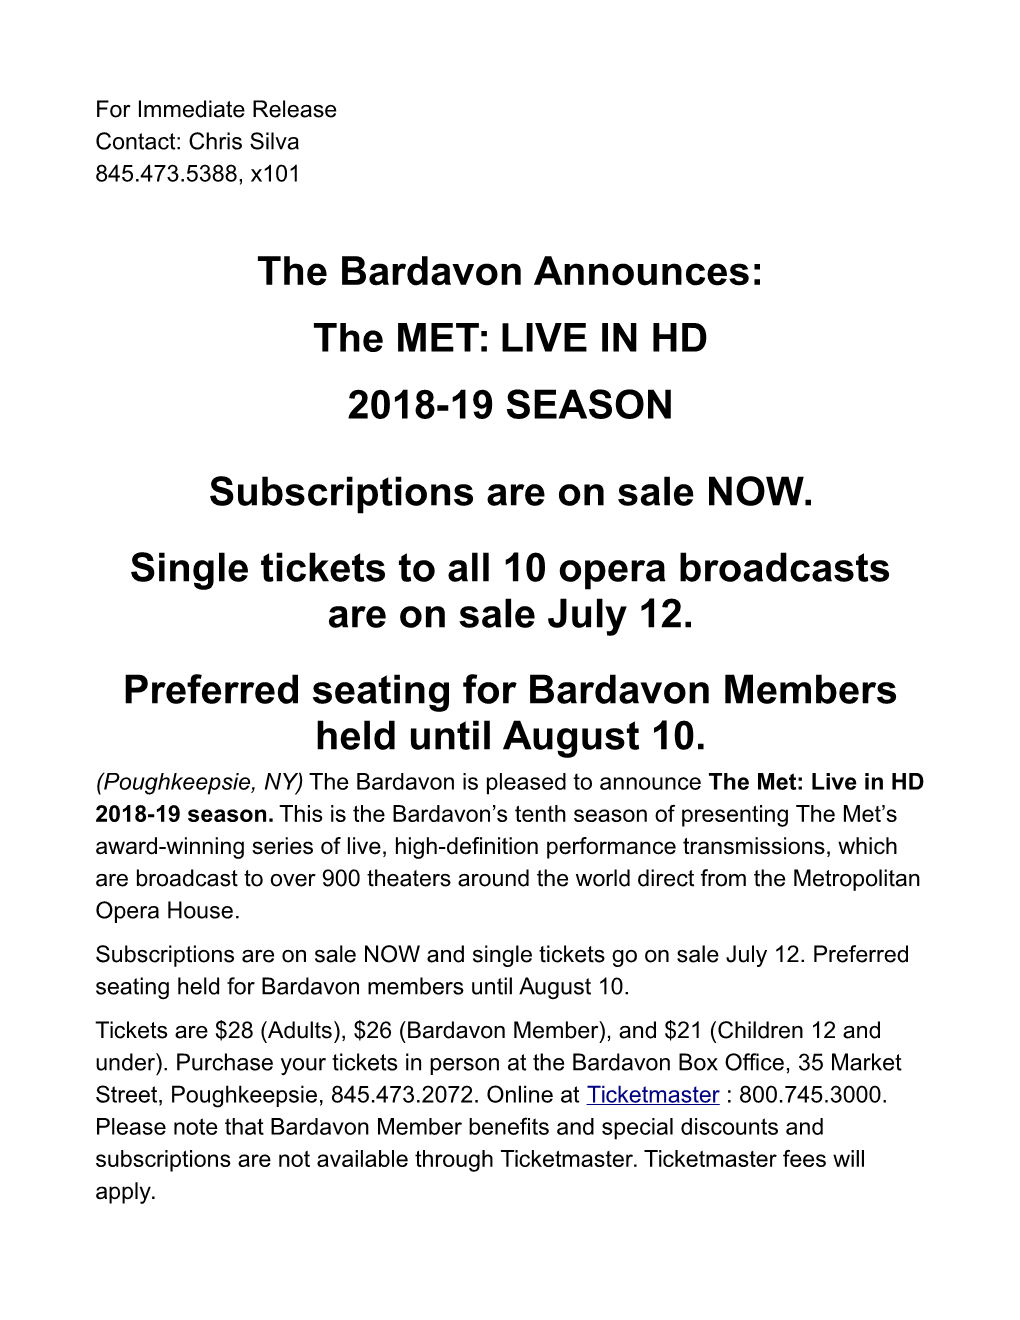 The Bardavon Announces: the MET: LIVE in HD 2018-19 SEASON